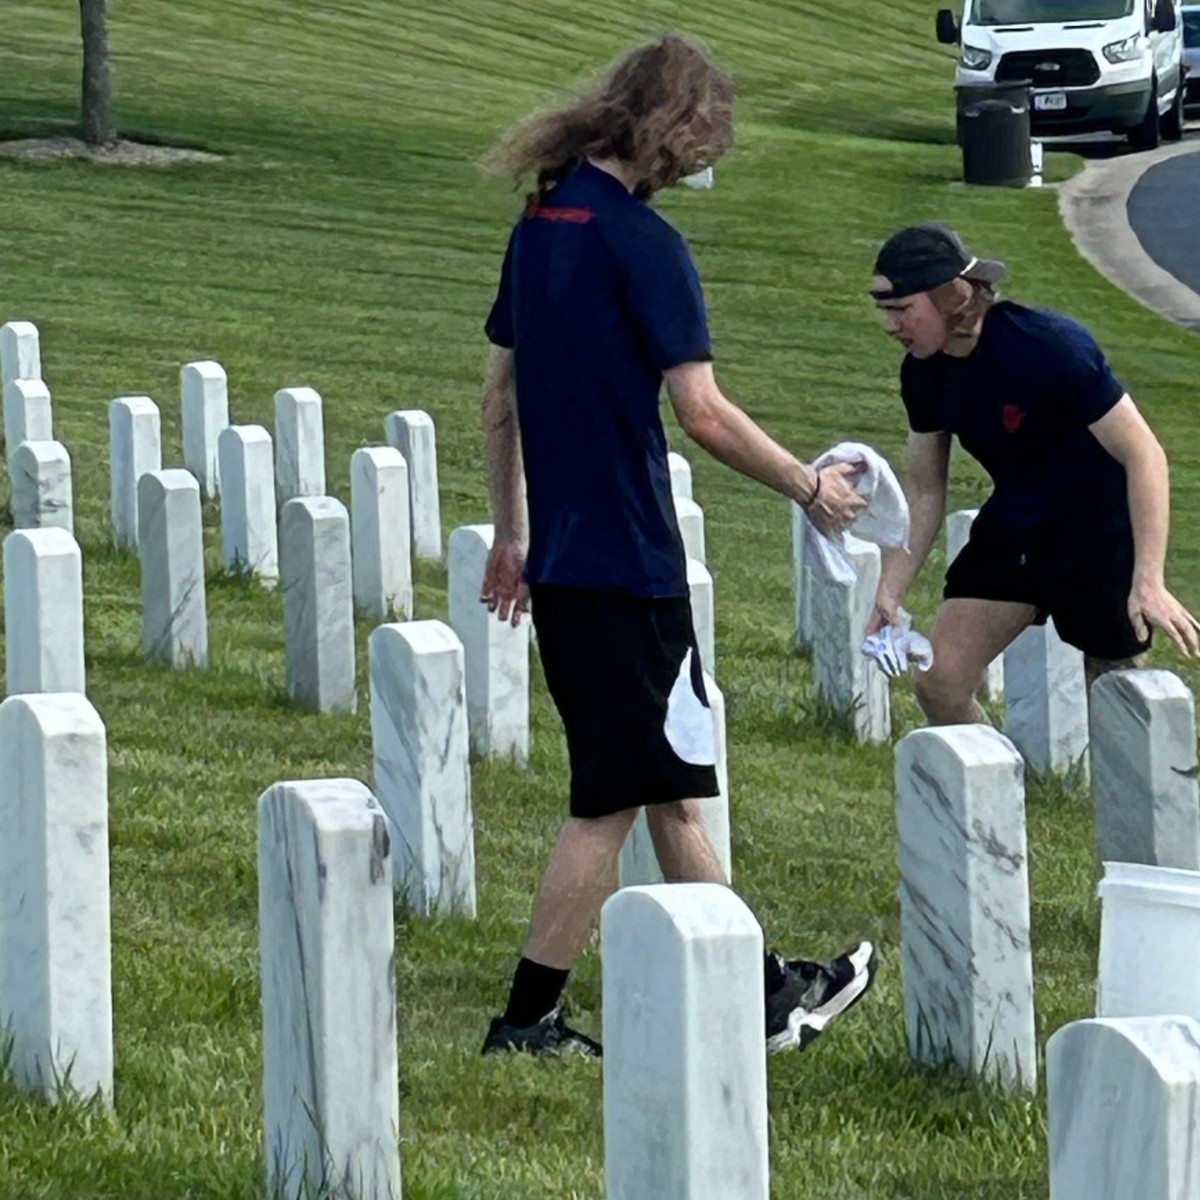 Thank you to the many volunteers who spent Saturday morning at the Kentucky Veterans Cemetery North cleaning the headstones of veterans. Groups from @CokeCCBCC, Amazon Air and Marine Corps Recruiting Station Florence joined together to honor veterans and preserve the cemetery.